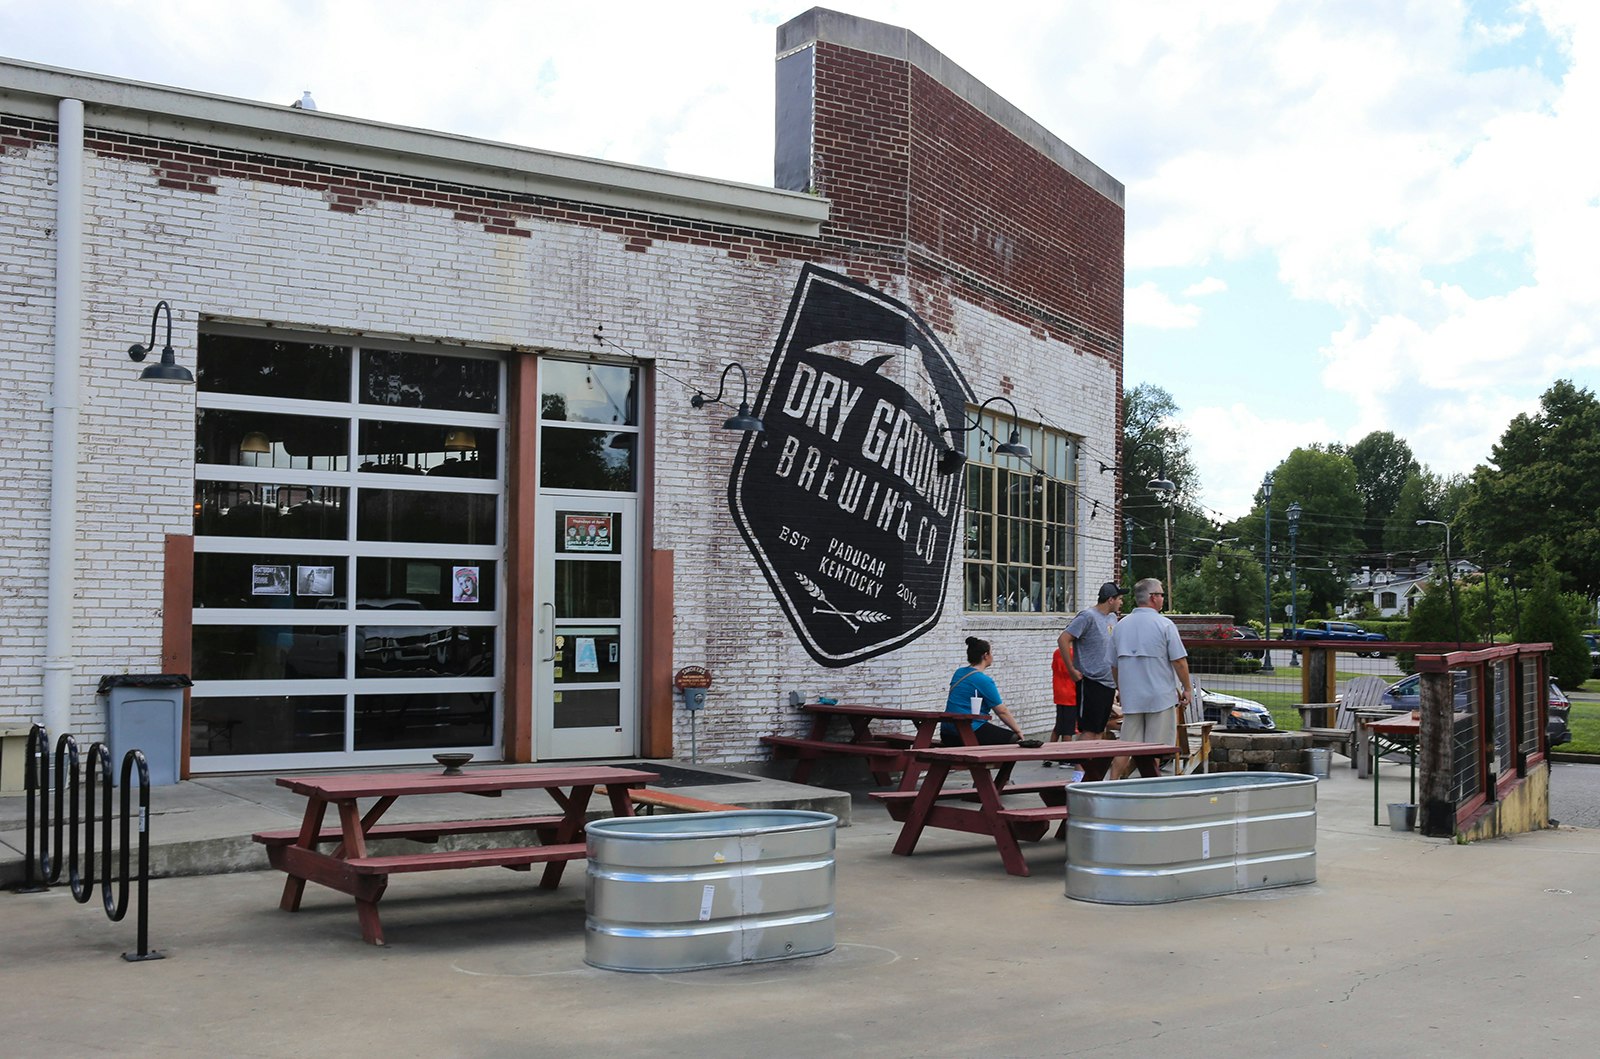 Exterior view of old industrial building reconfigured into a brewery on a partly cloudy day